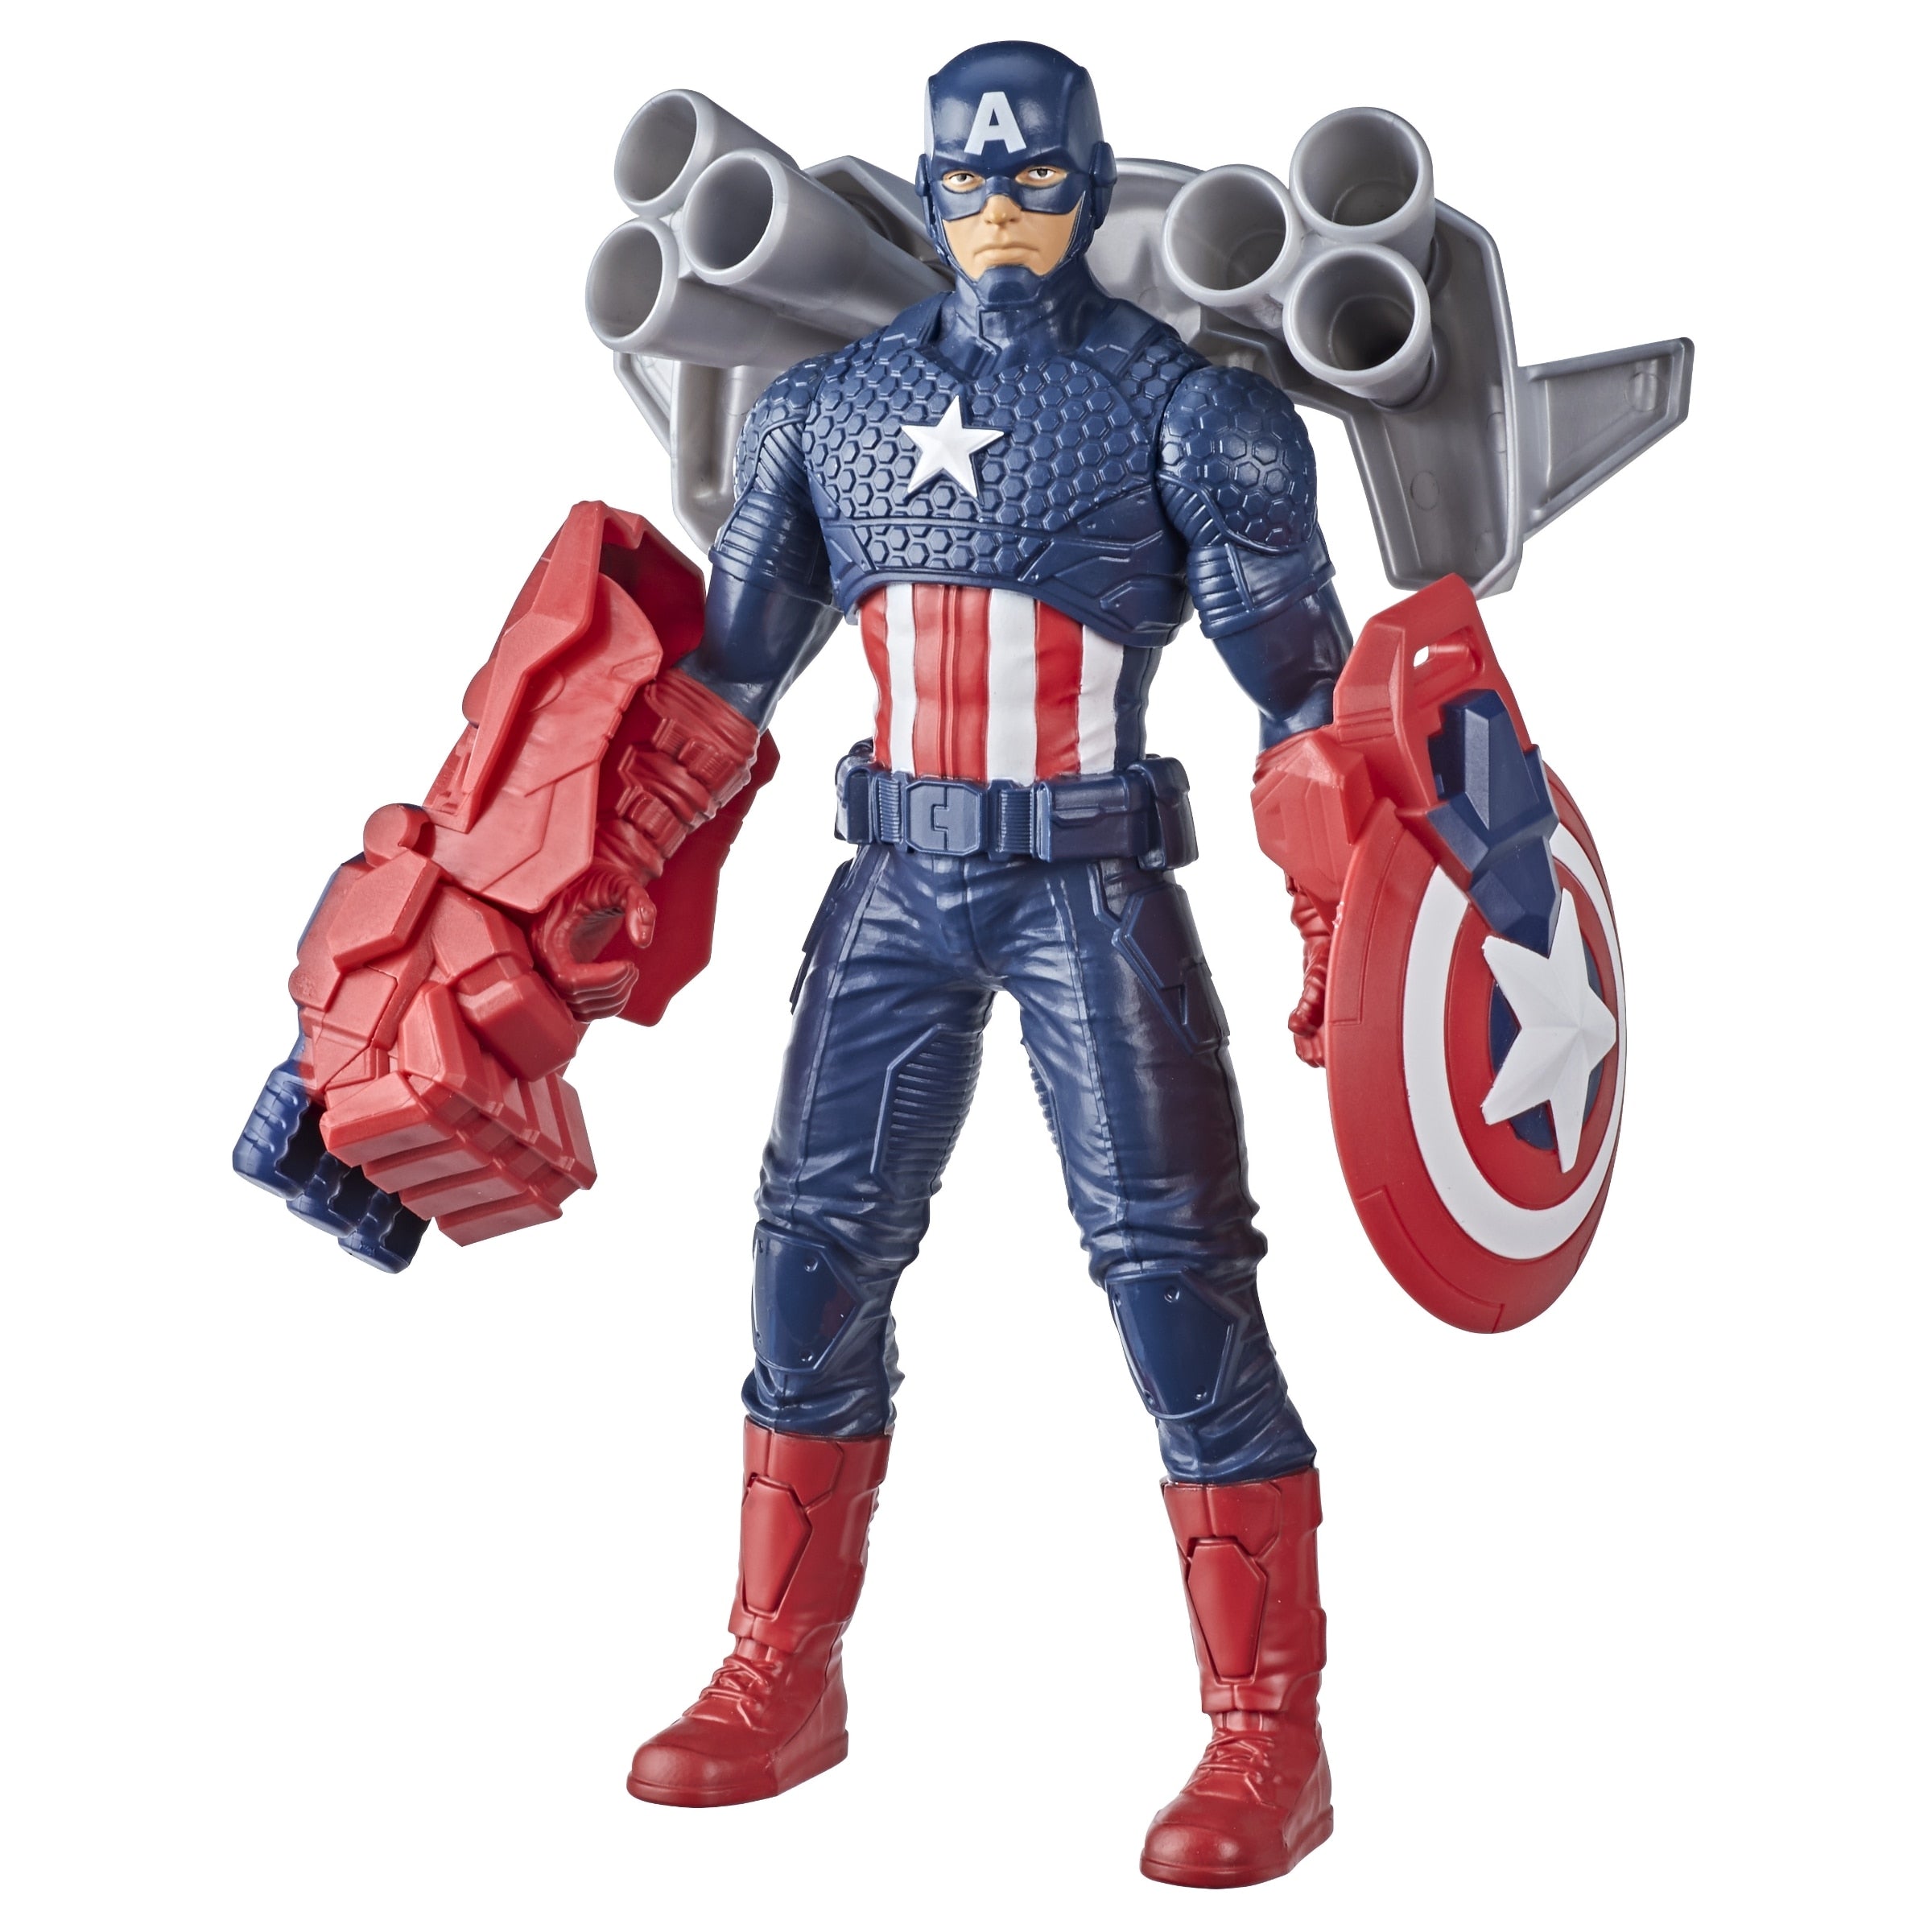 Marvel Action Figures – Captain America with Gear